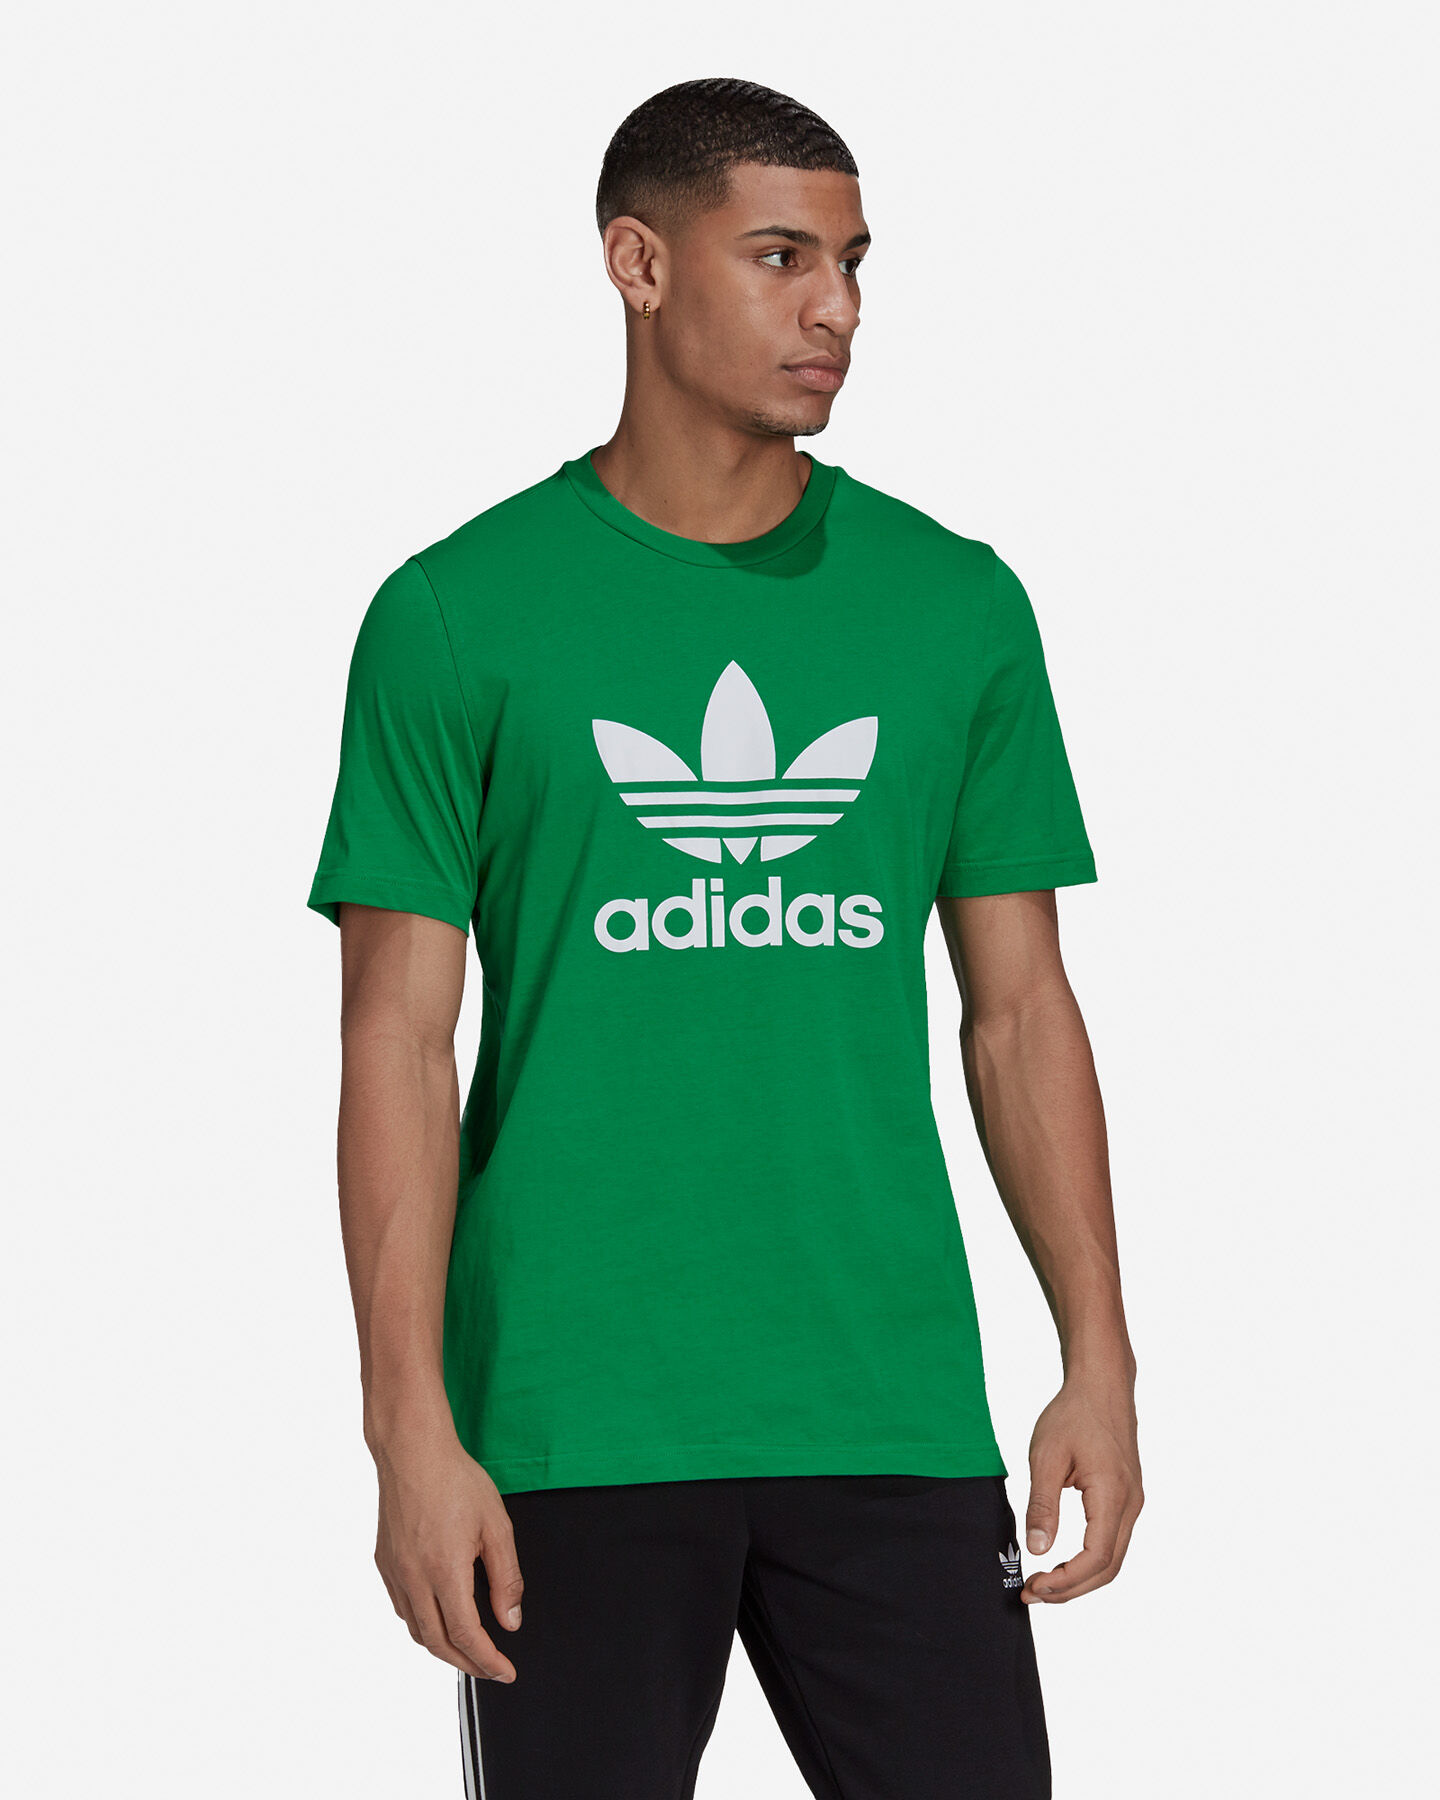  T-Shirt ADIDAS TREFOIL M S5324118 scatto 1